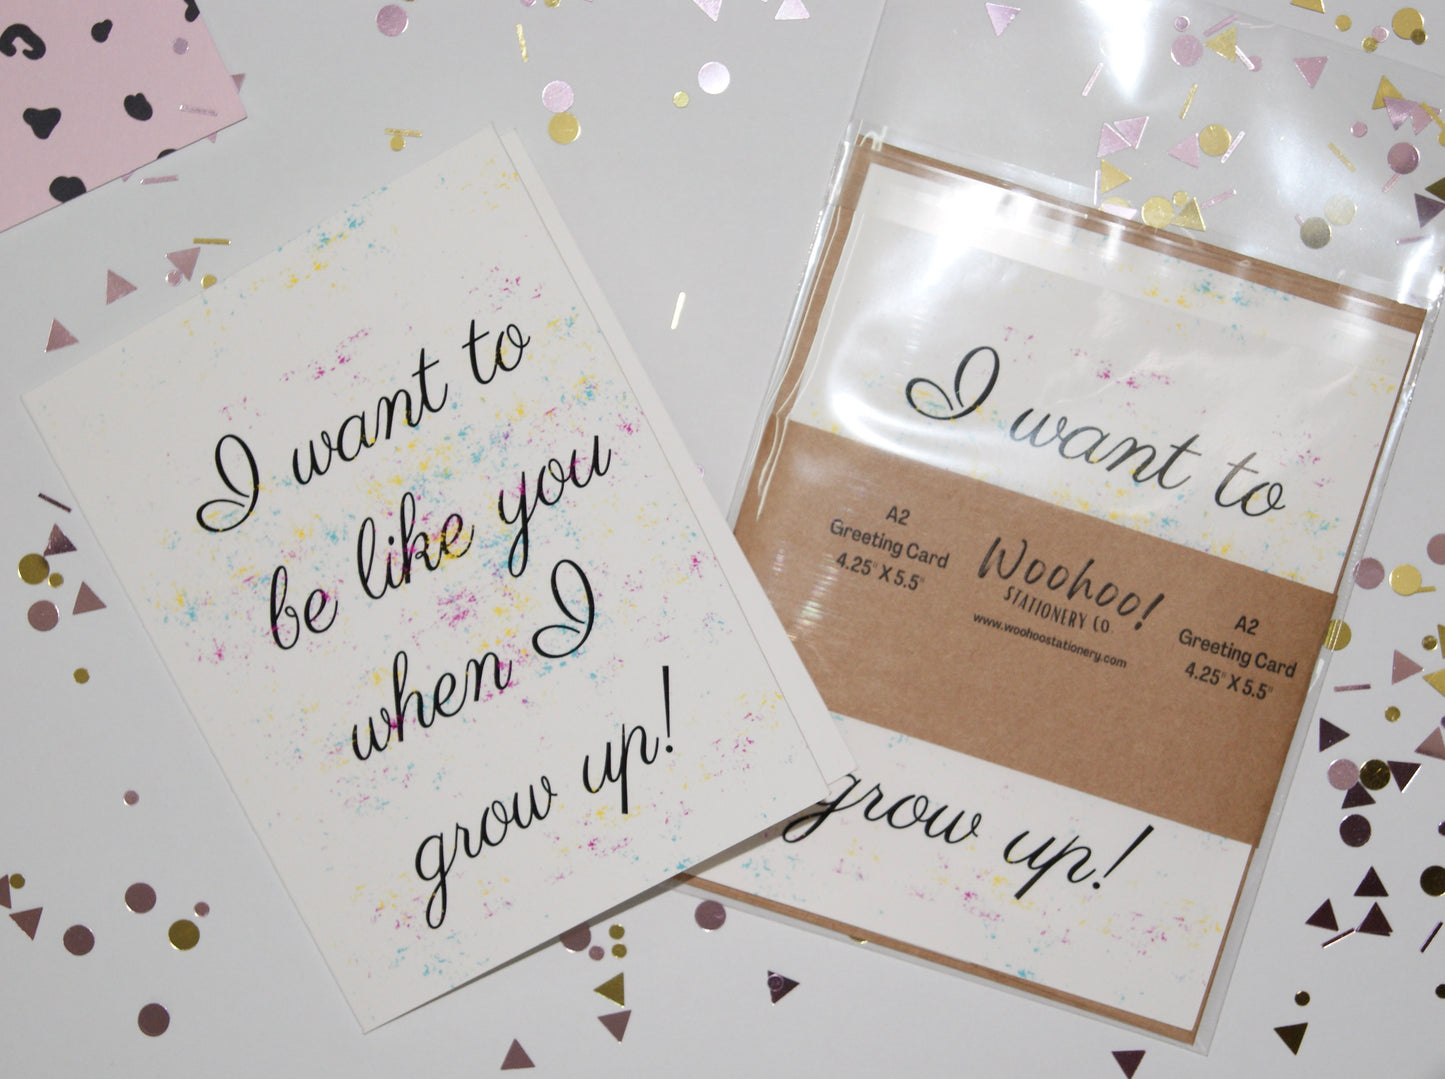 I Want To Be Like You When I Grow Up Encouragement Card